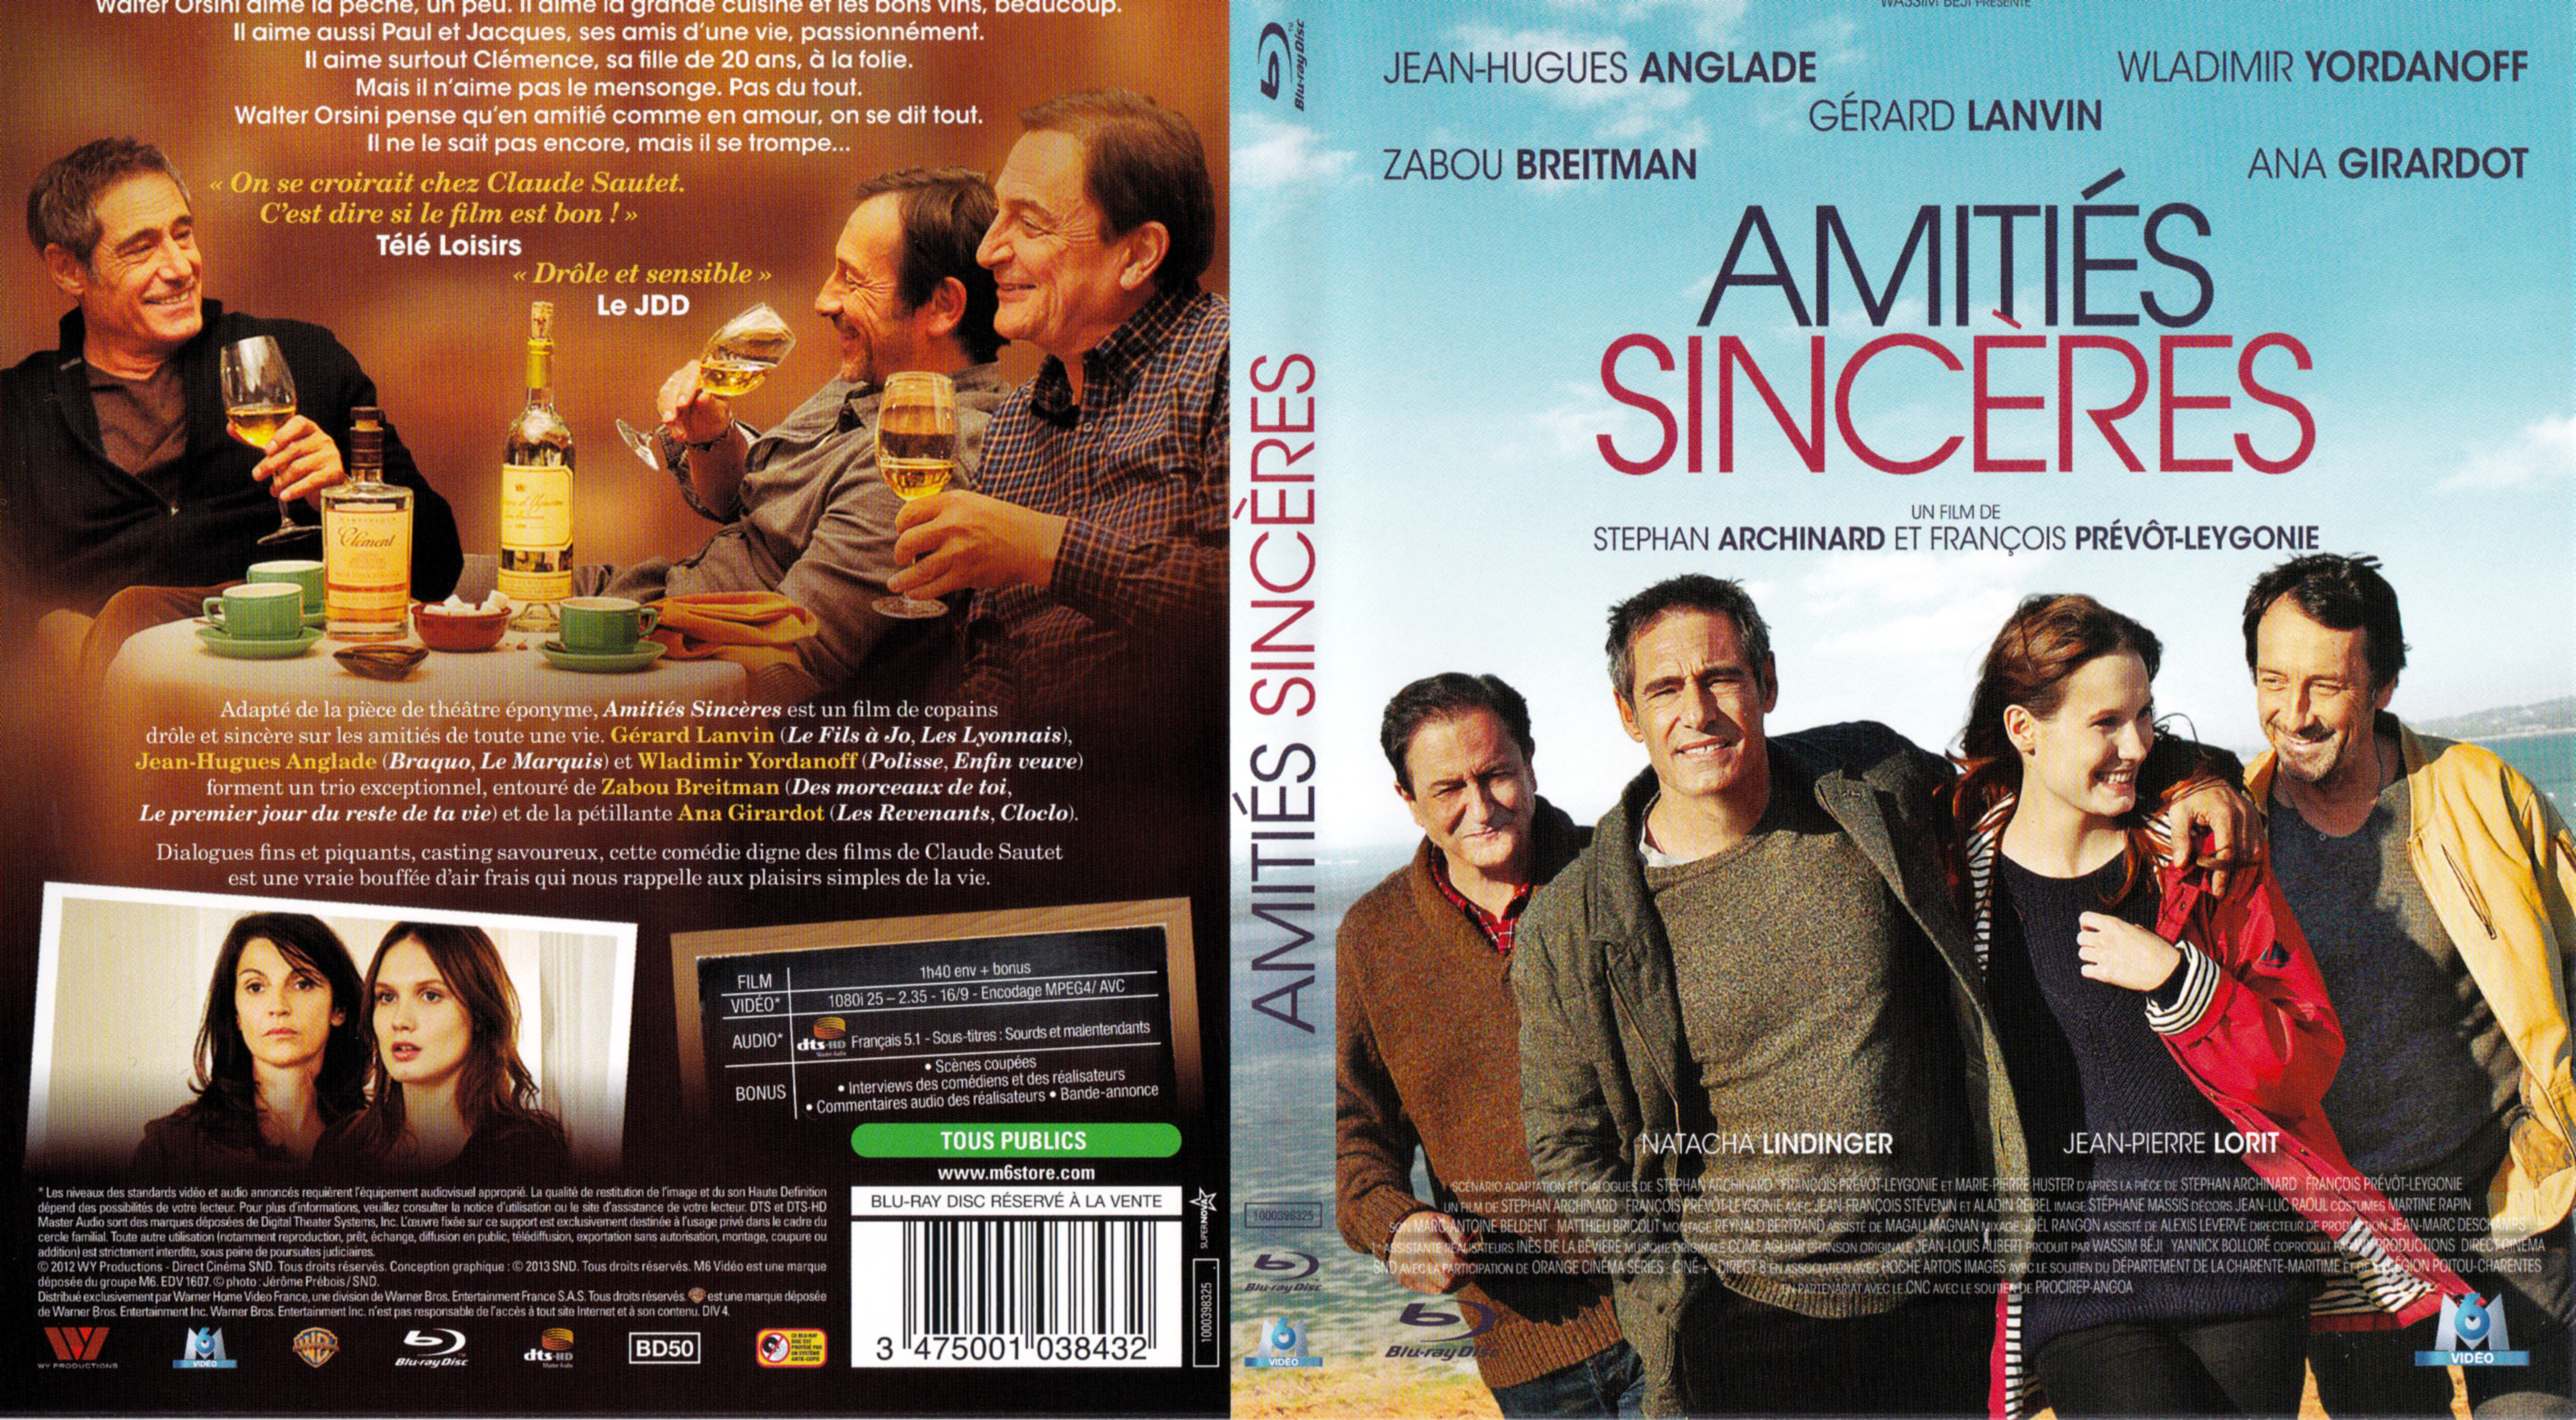 Jaquette DVD Amitis sincres (BLU-RAY)